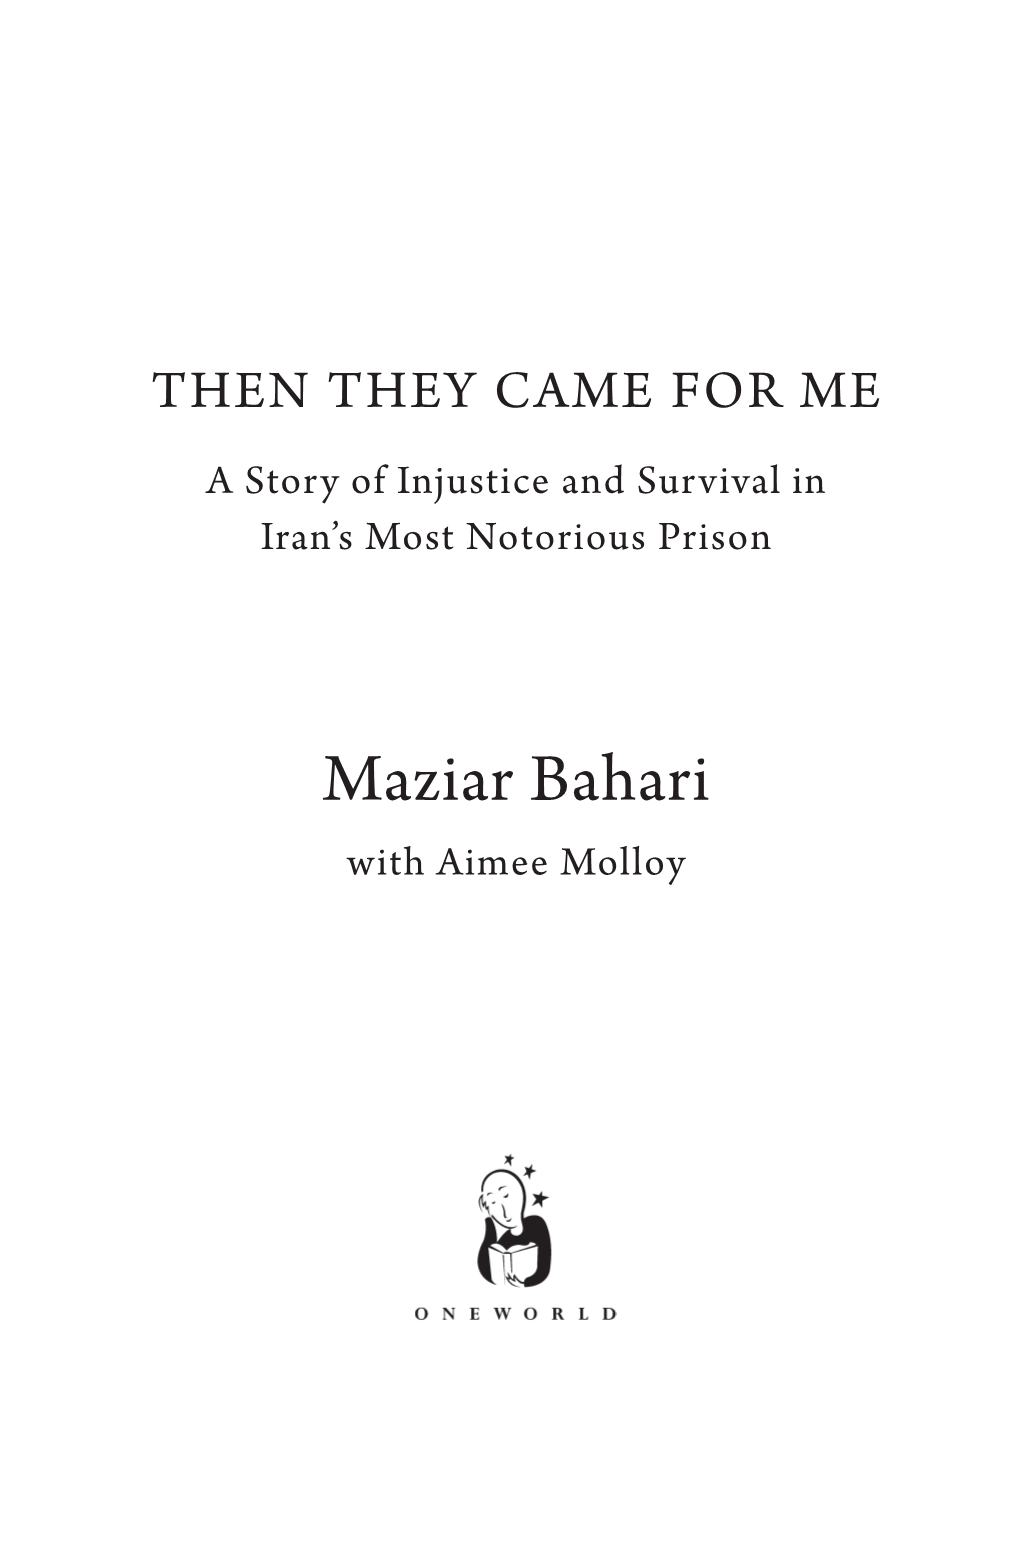 Maziar Bahari Is an Award- Winning Journalist, Documentary a Story of Injustice and Survival in Filmmaker, and Human-Rights Acti Vist